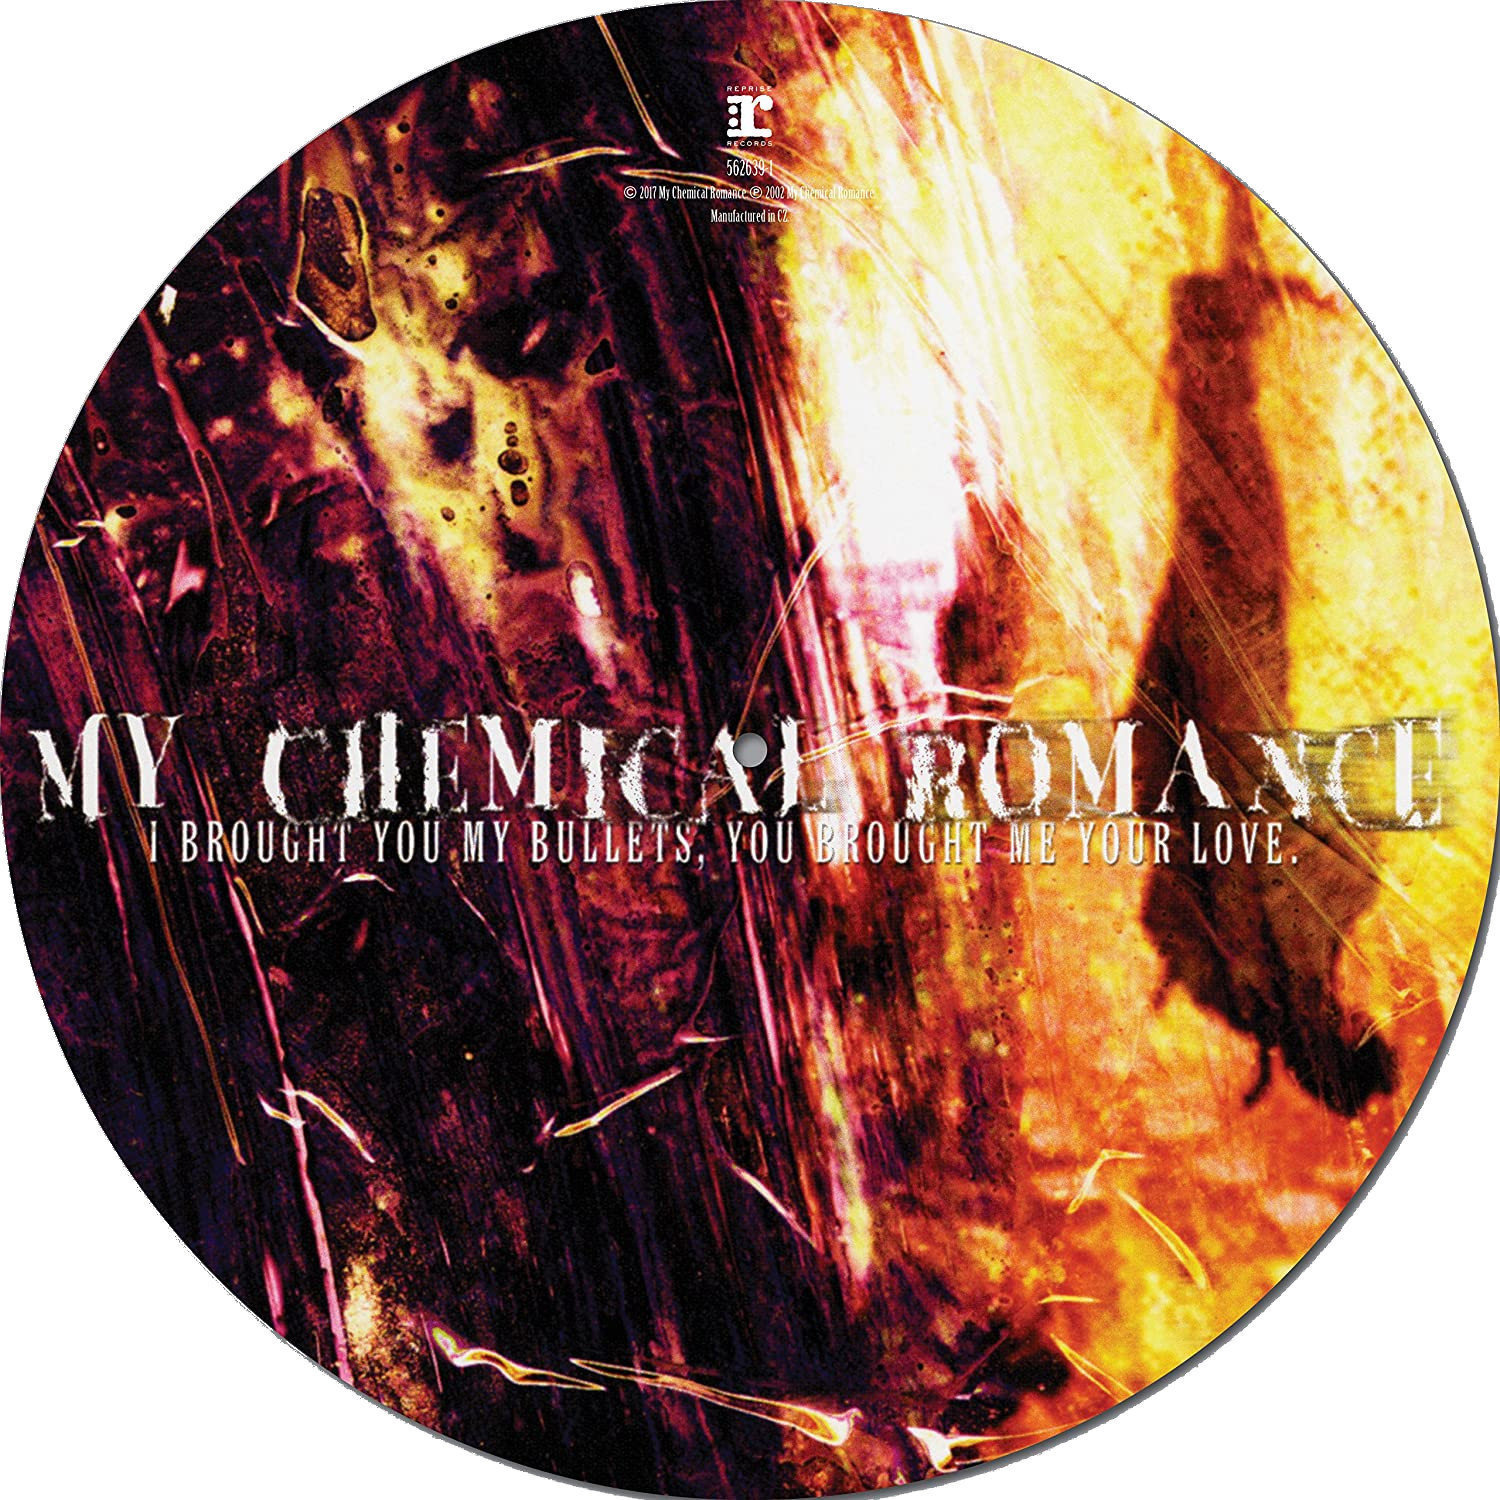 Disque vinyle My Chemical Romance - I Brought You My Bullets, You Brought Me Your Love (Picture Disc) (LP)